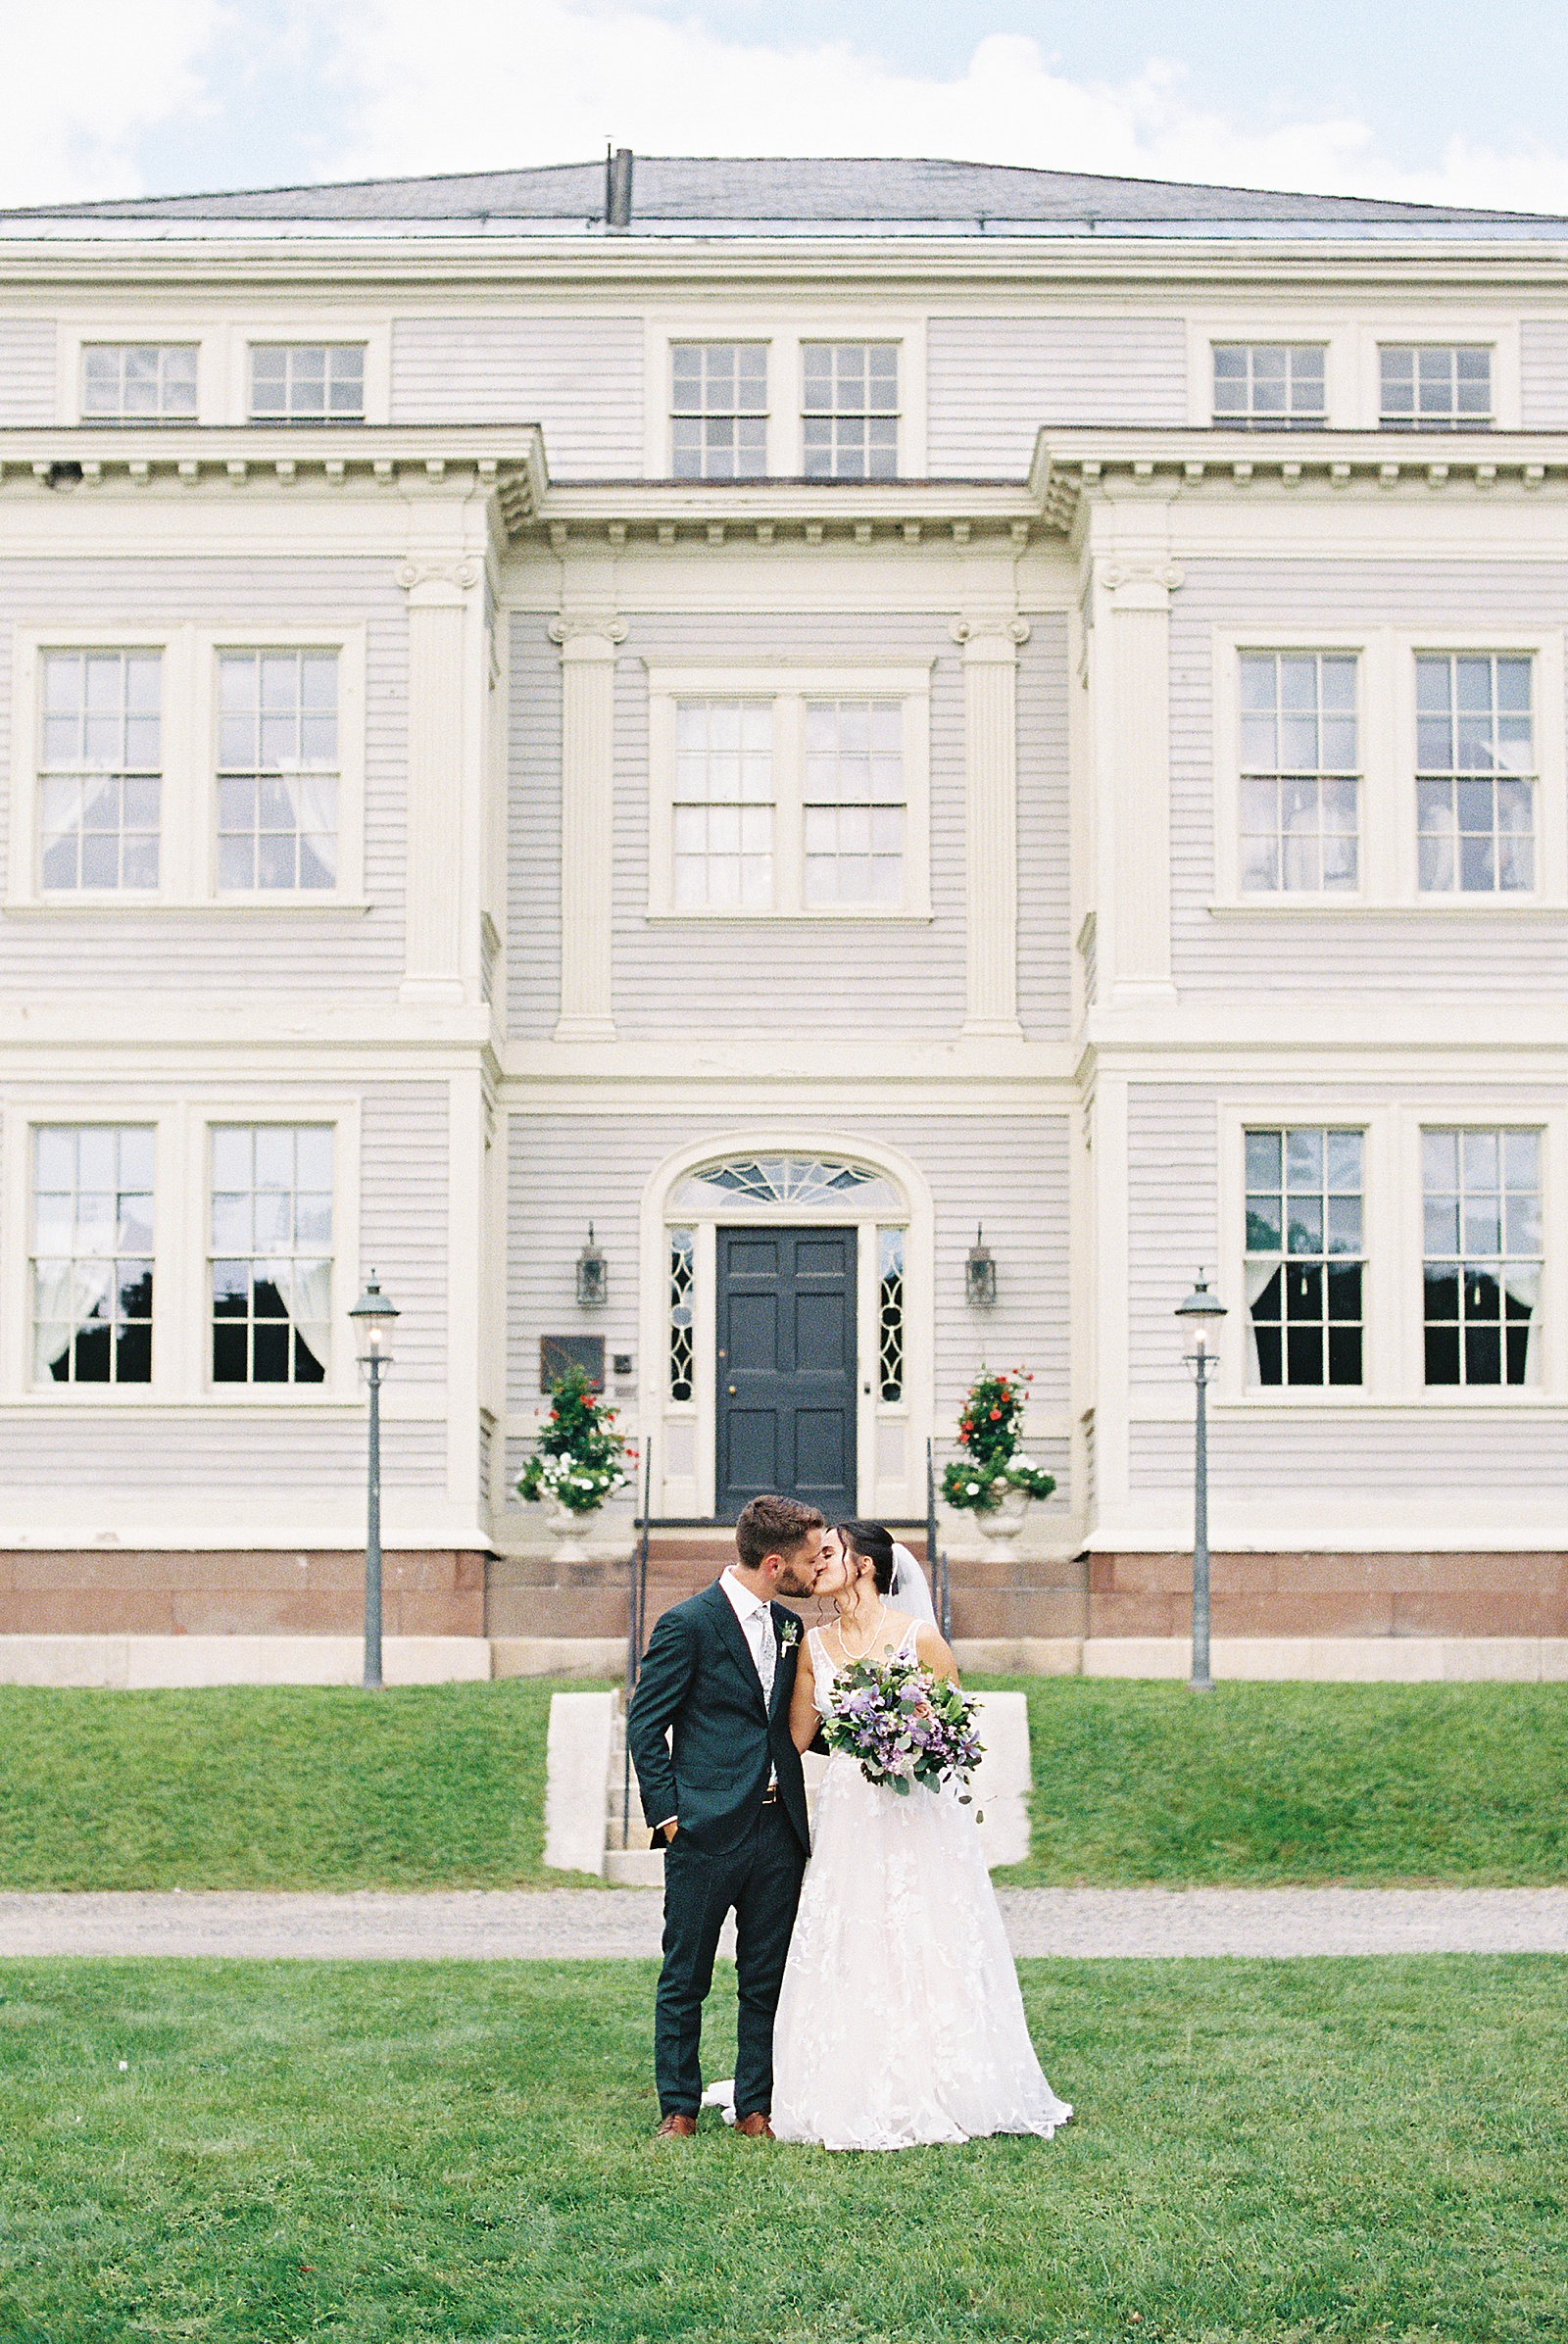 Bride and groom share a kiss in front of the Lyman Estate.